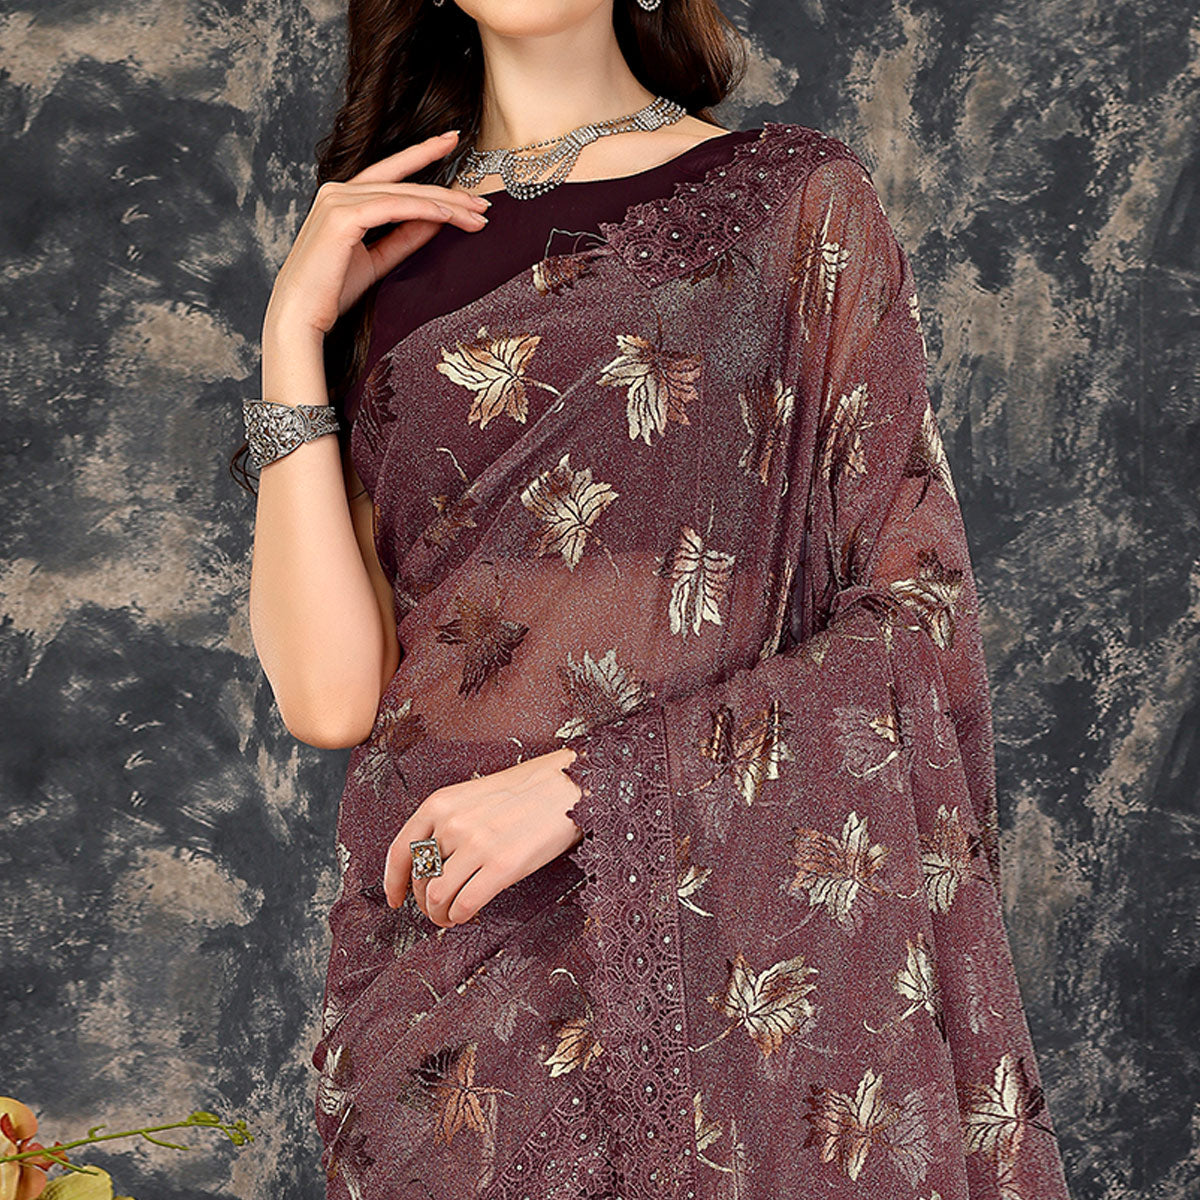 Dark Mauve Foil Printed Lycra Saree With Embroidered Lace Border